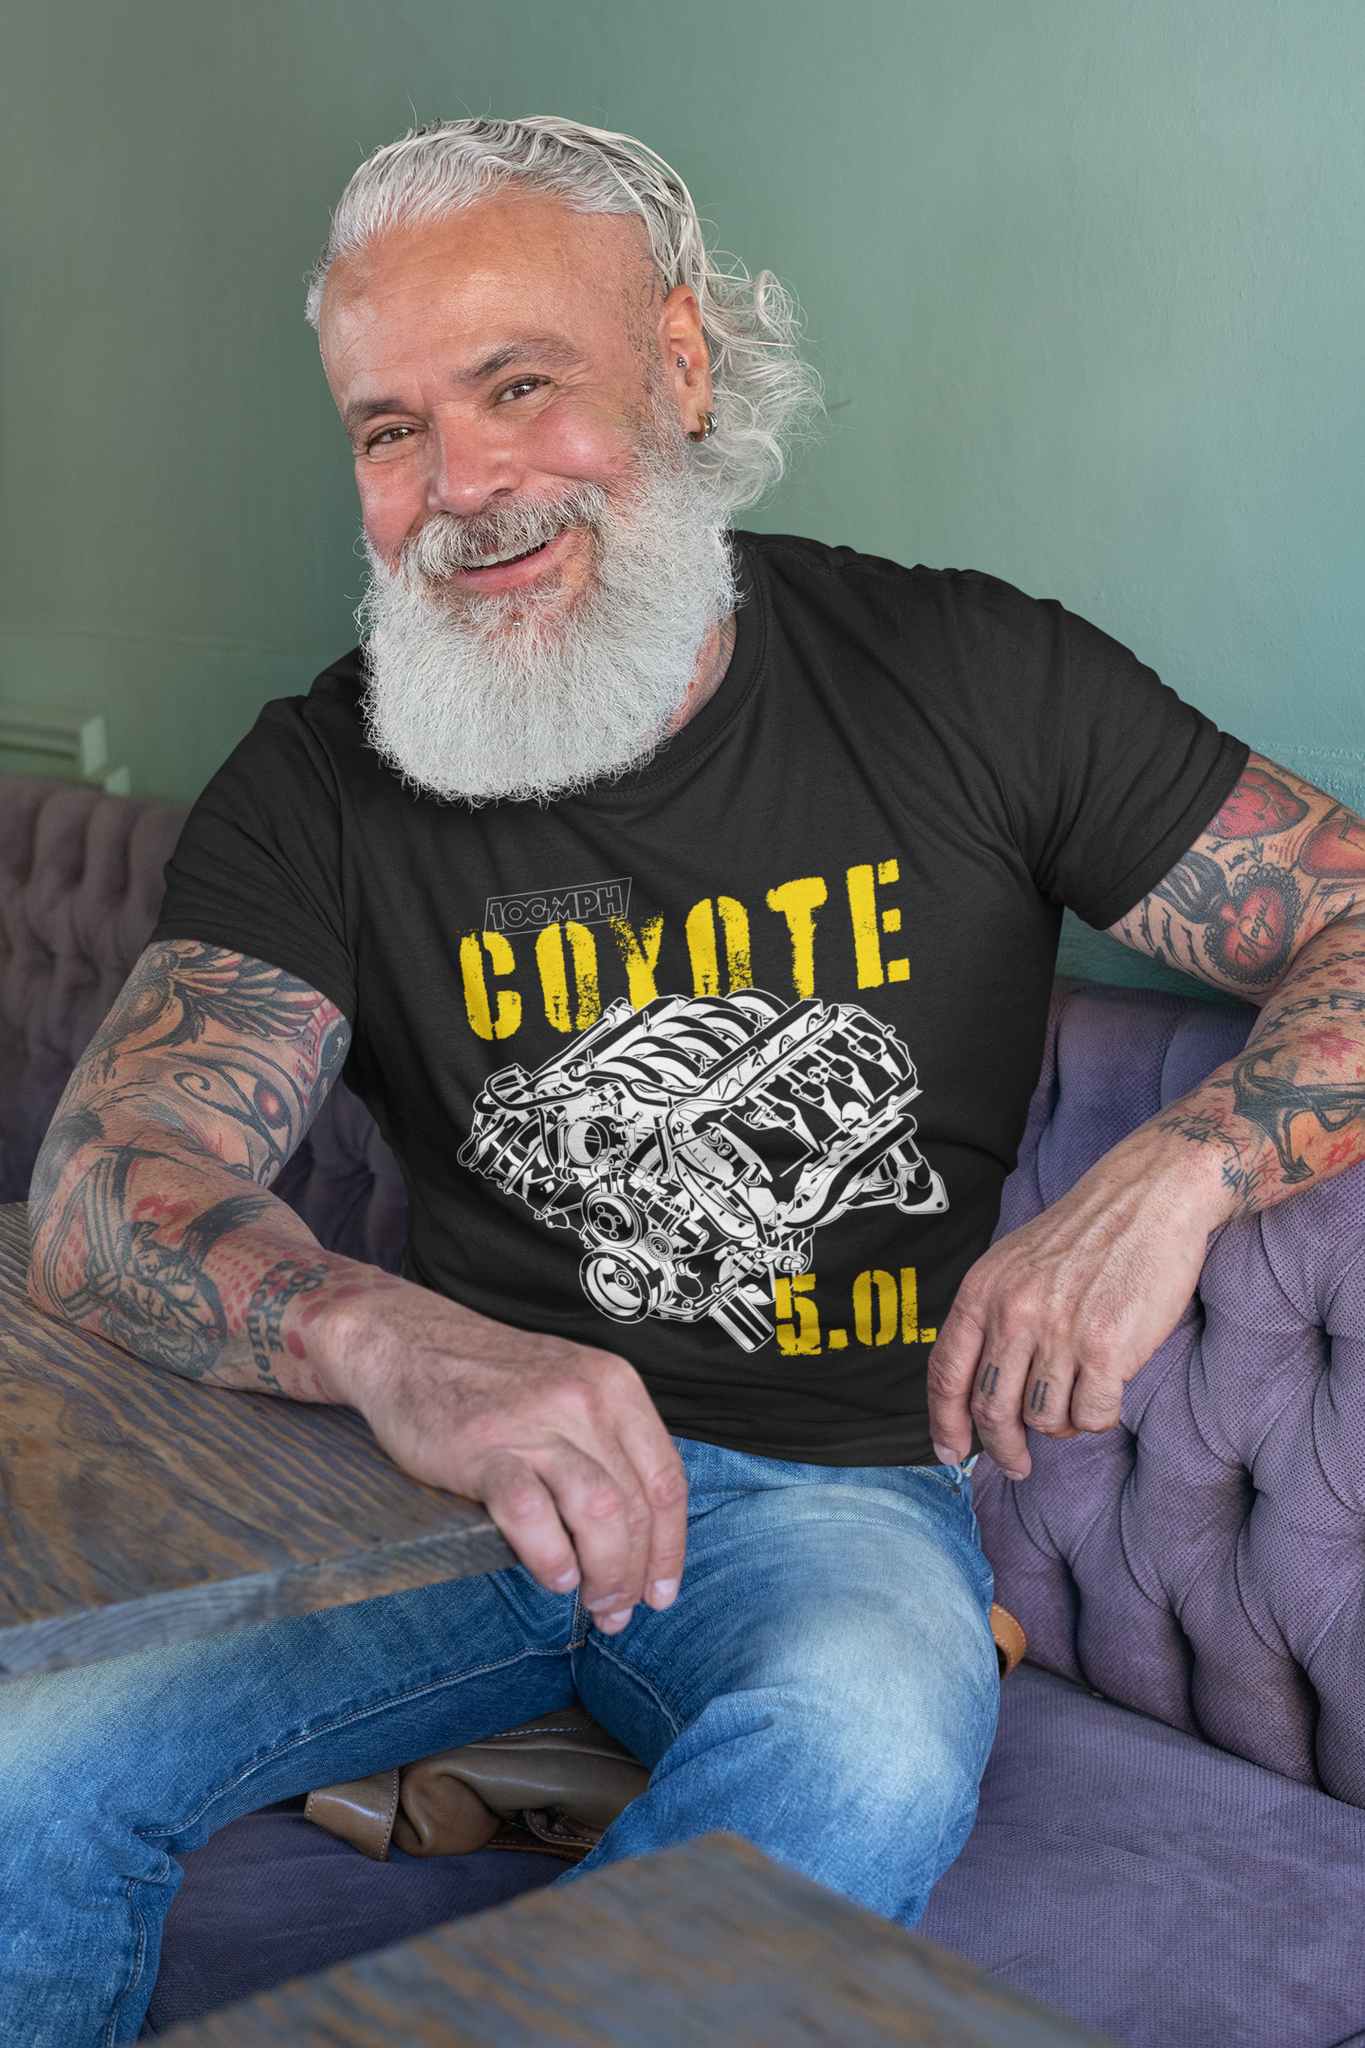 A man sitting in a restaurant leaning against a table. He's wearing a black tee shirt with an image of a Coyote engine. The tee shirt has text that reads "Coyote 5.0L". 